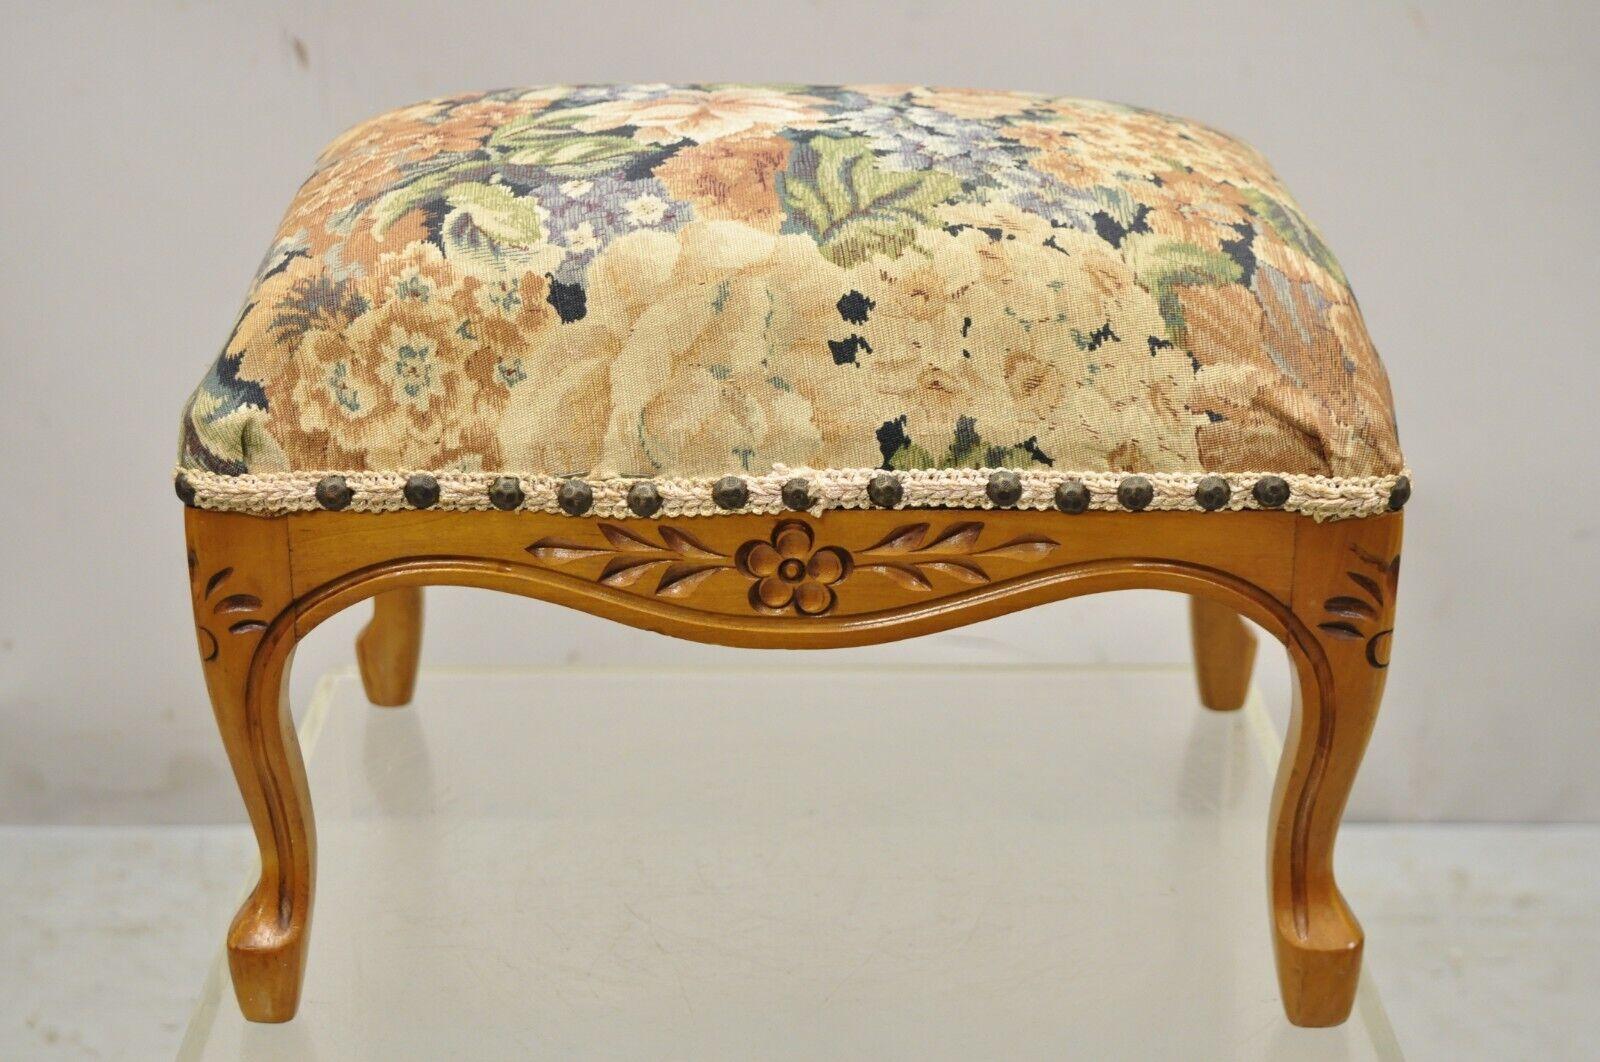 Vintage French Country Provincial Louis XV style maple wood small ottoman footstool. Item features floral tapestry upholstery, solid wood frame. Circa mid-20th century. Measurements: 11